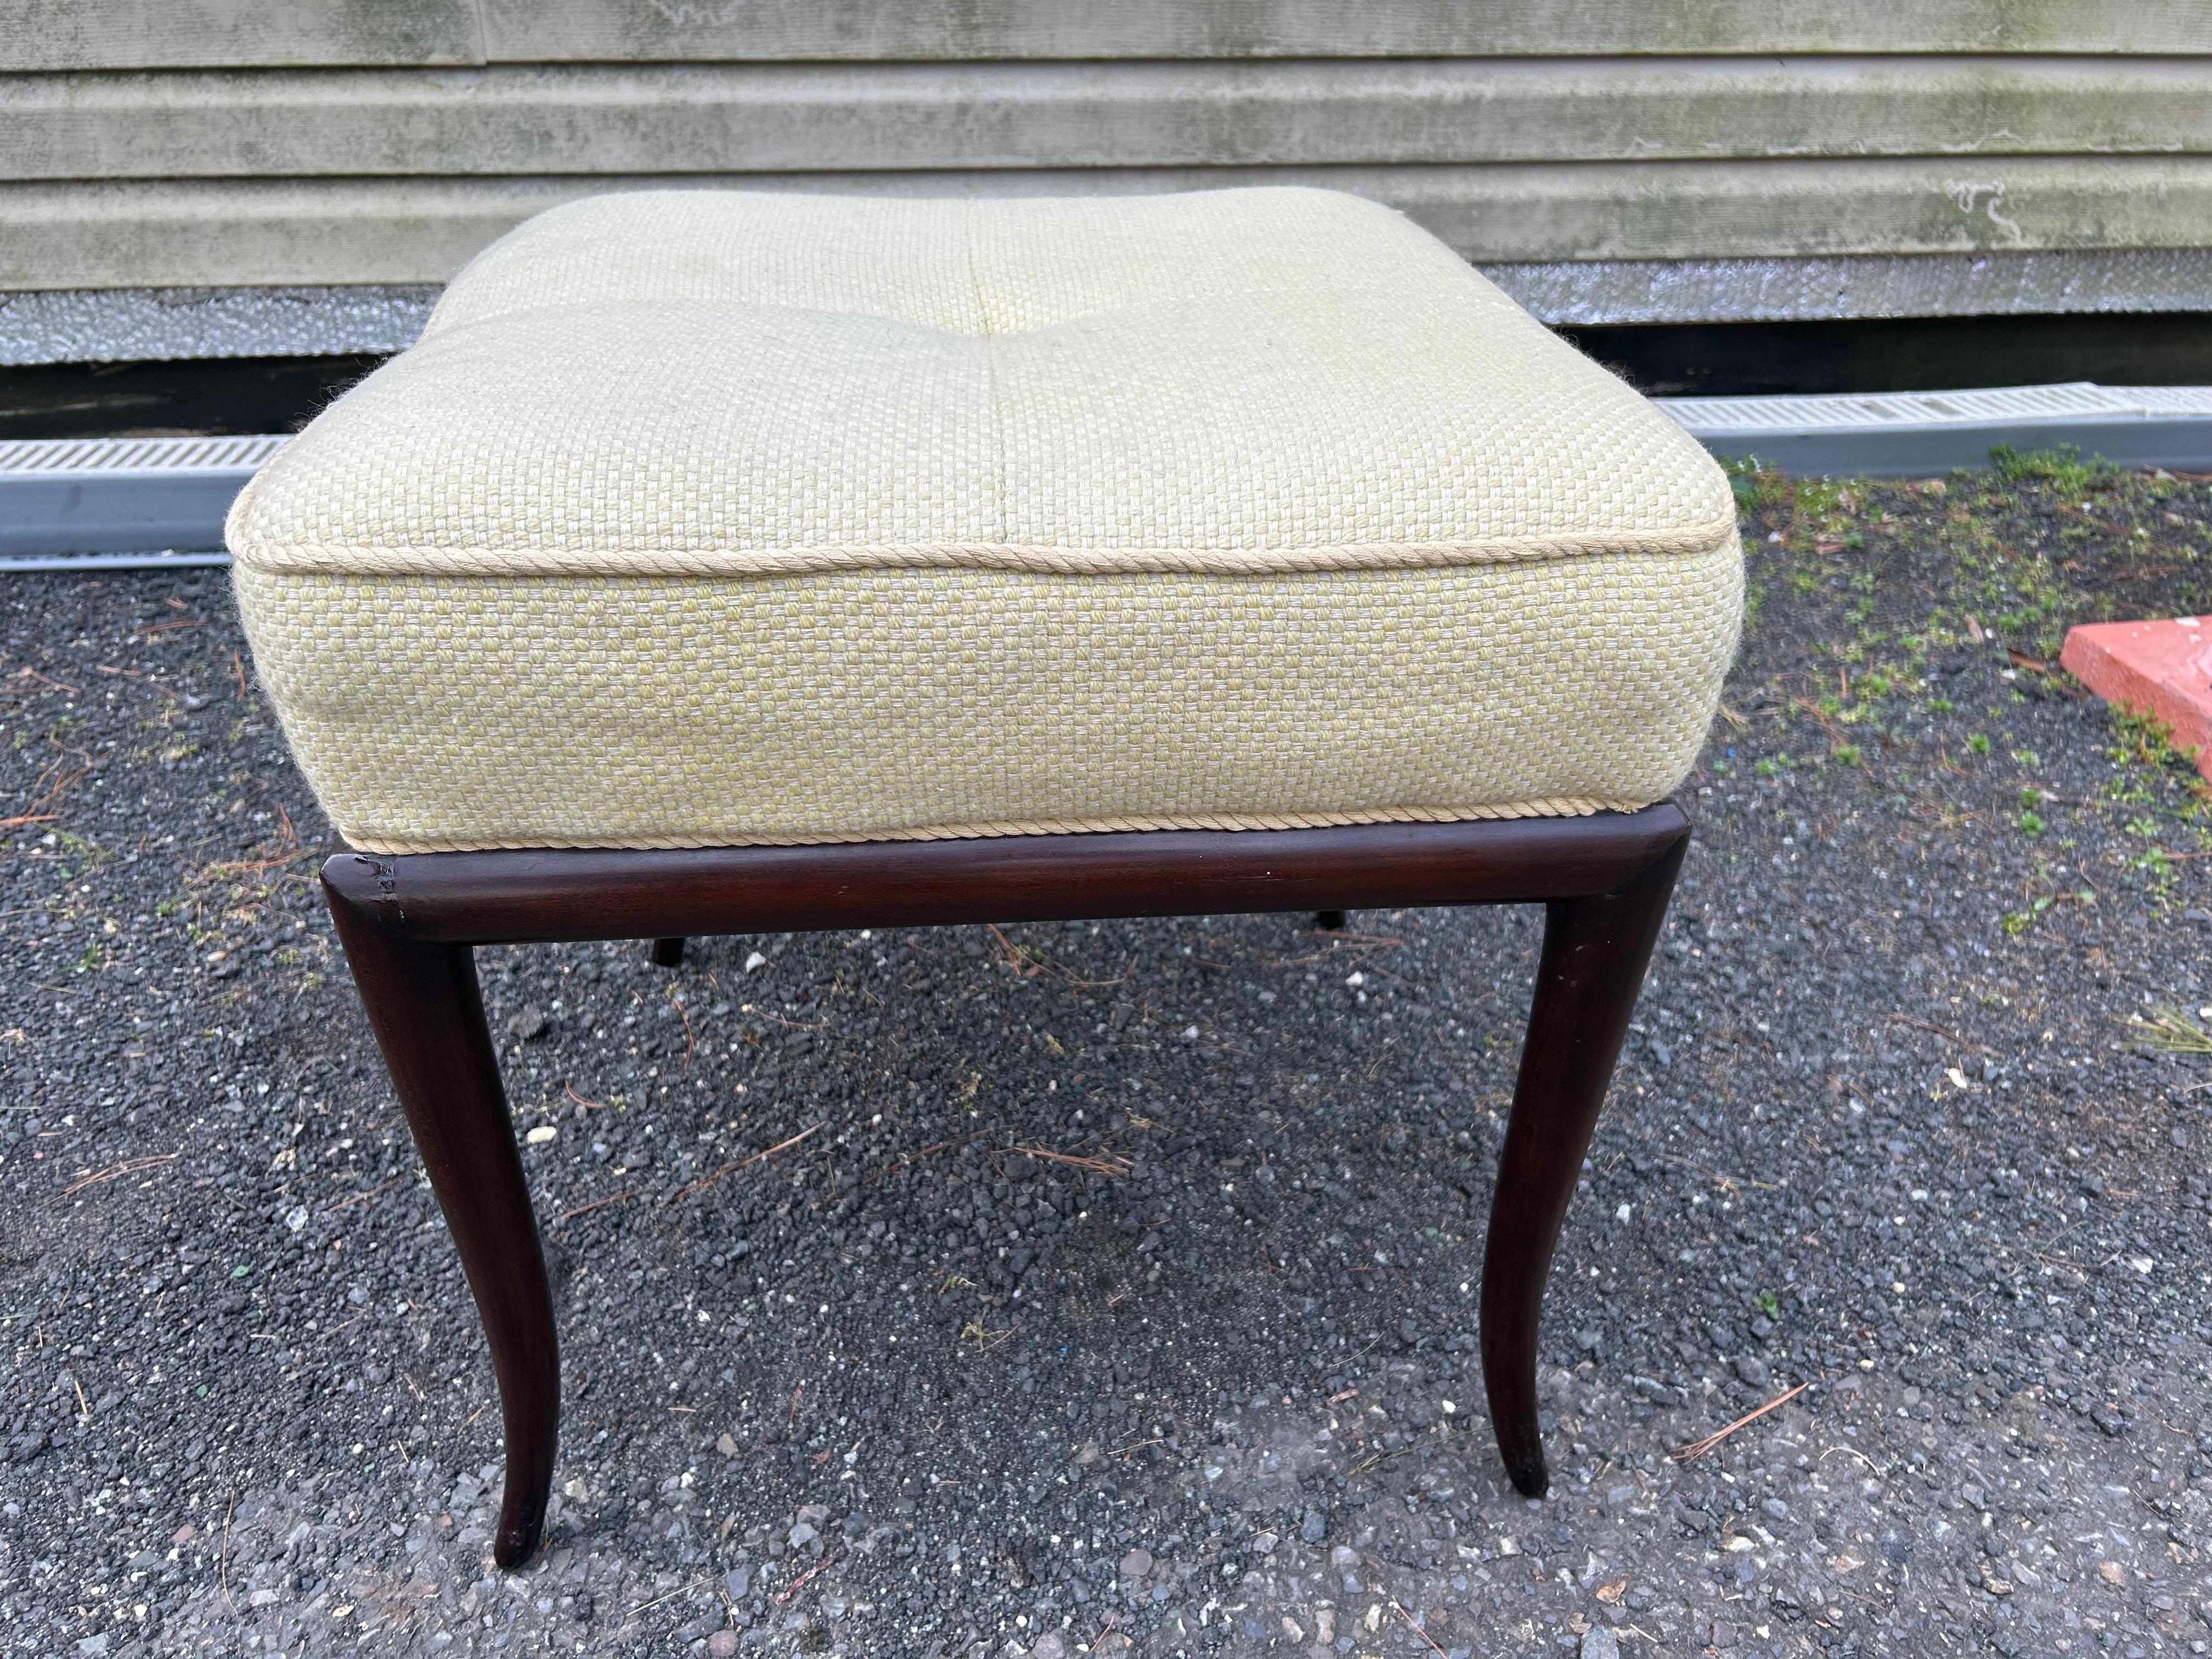 Fabulous upholstered stool/ottoman with walnut frame. Designed by T.H. Robsjohn-Gibbings for Widdicomb.
American, c. 1950  This piece measures 20